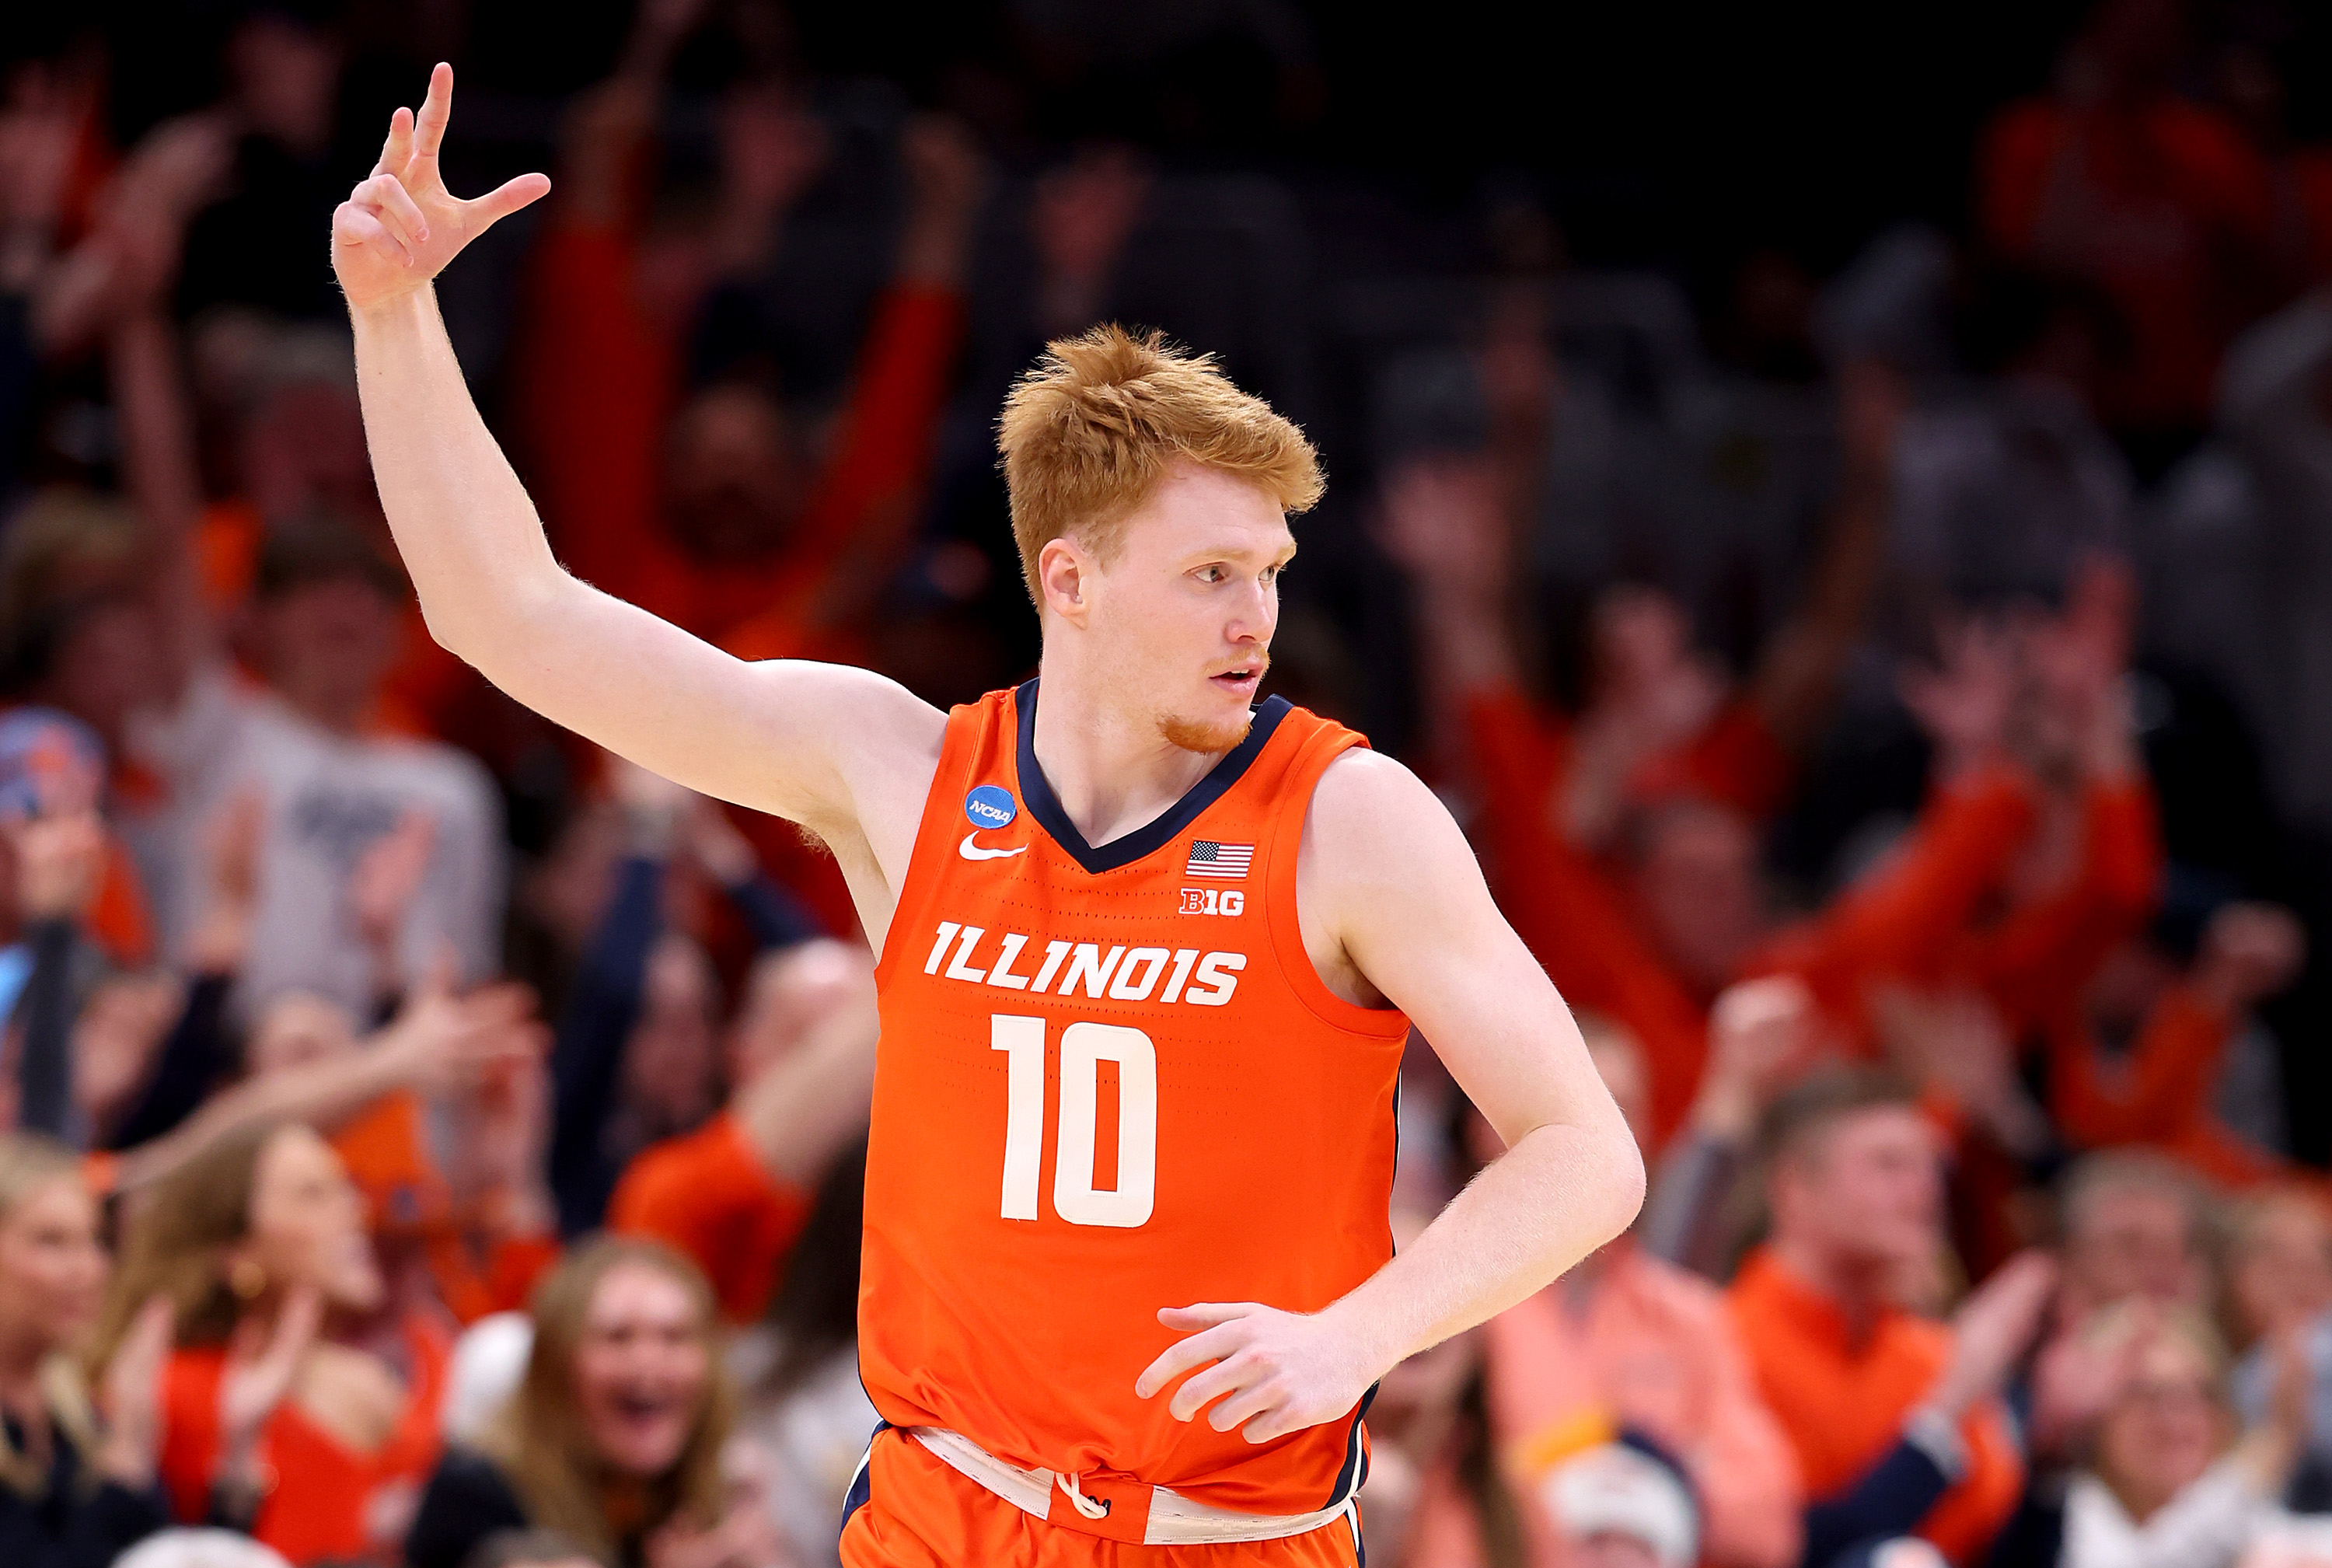 BOSTON, MASSACHUSETTS - MARCH 28: Luke Goode #10 of the Illinois Fighting Illini celebrates a three point basket against the Iowa State Cyclones during the second half in the Sweet 16 round of the NCAA Men's Basketball Tournament at TD Garden on March 28, 2024 in Boston, Massachusetts. (Photo by Michael Reaves/Getty Images)